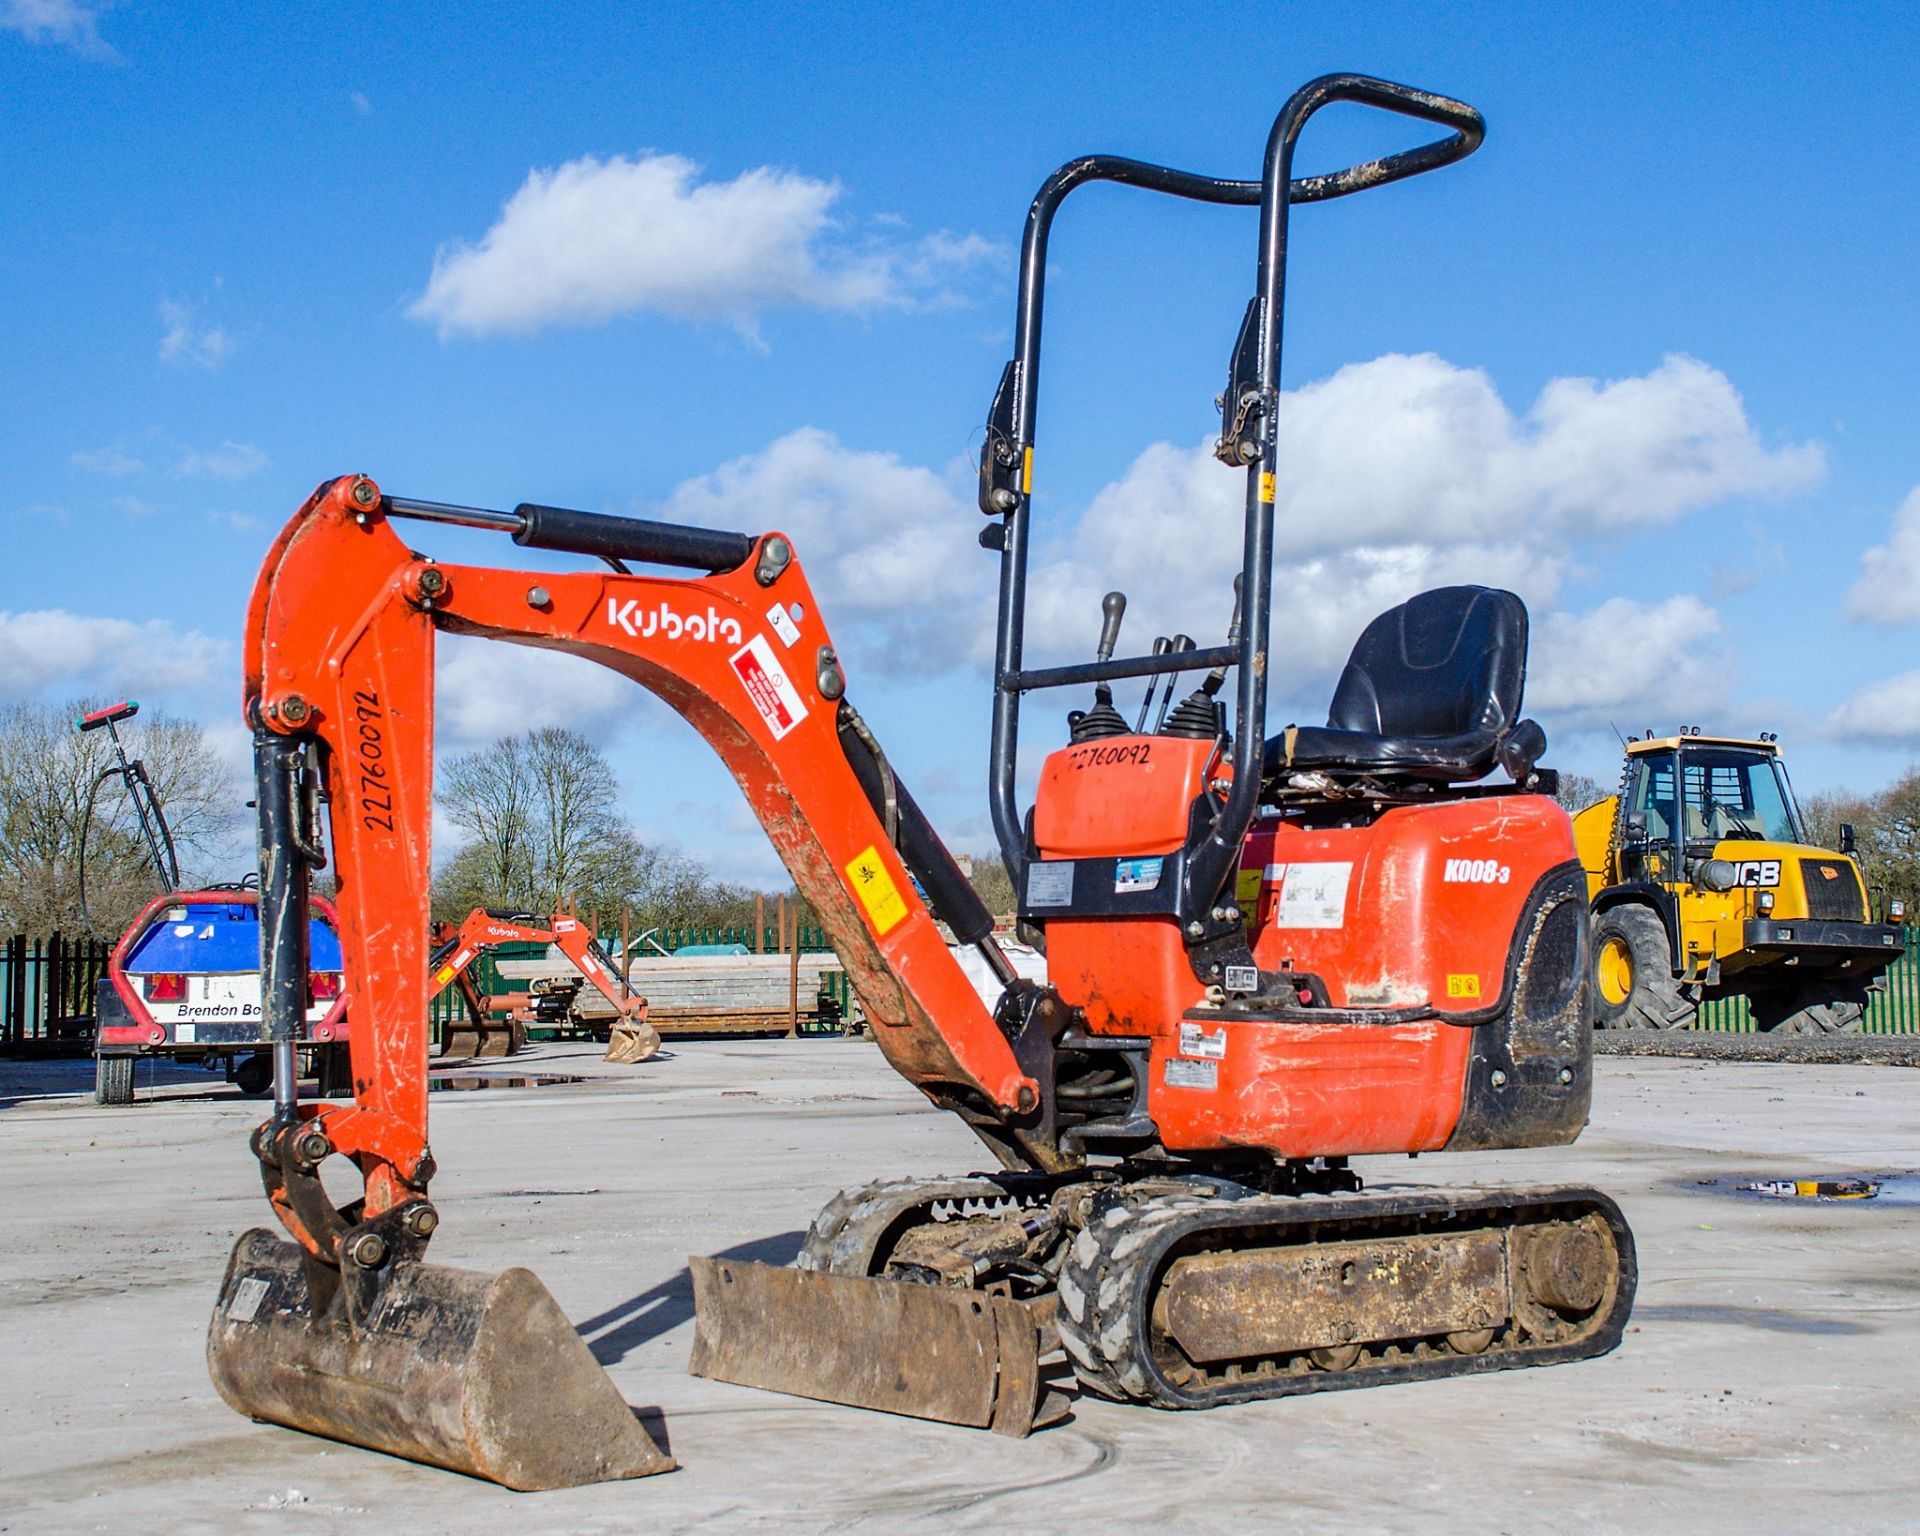 Kubota K008-3 0.8 tonne rubber tracked micro excavator Year: 2017 S/N: 29573 Recorded Hours: 1058